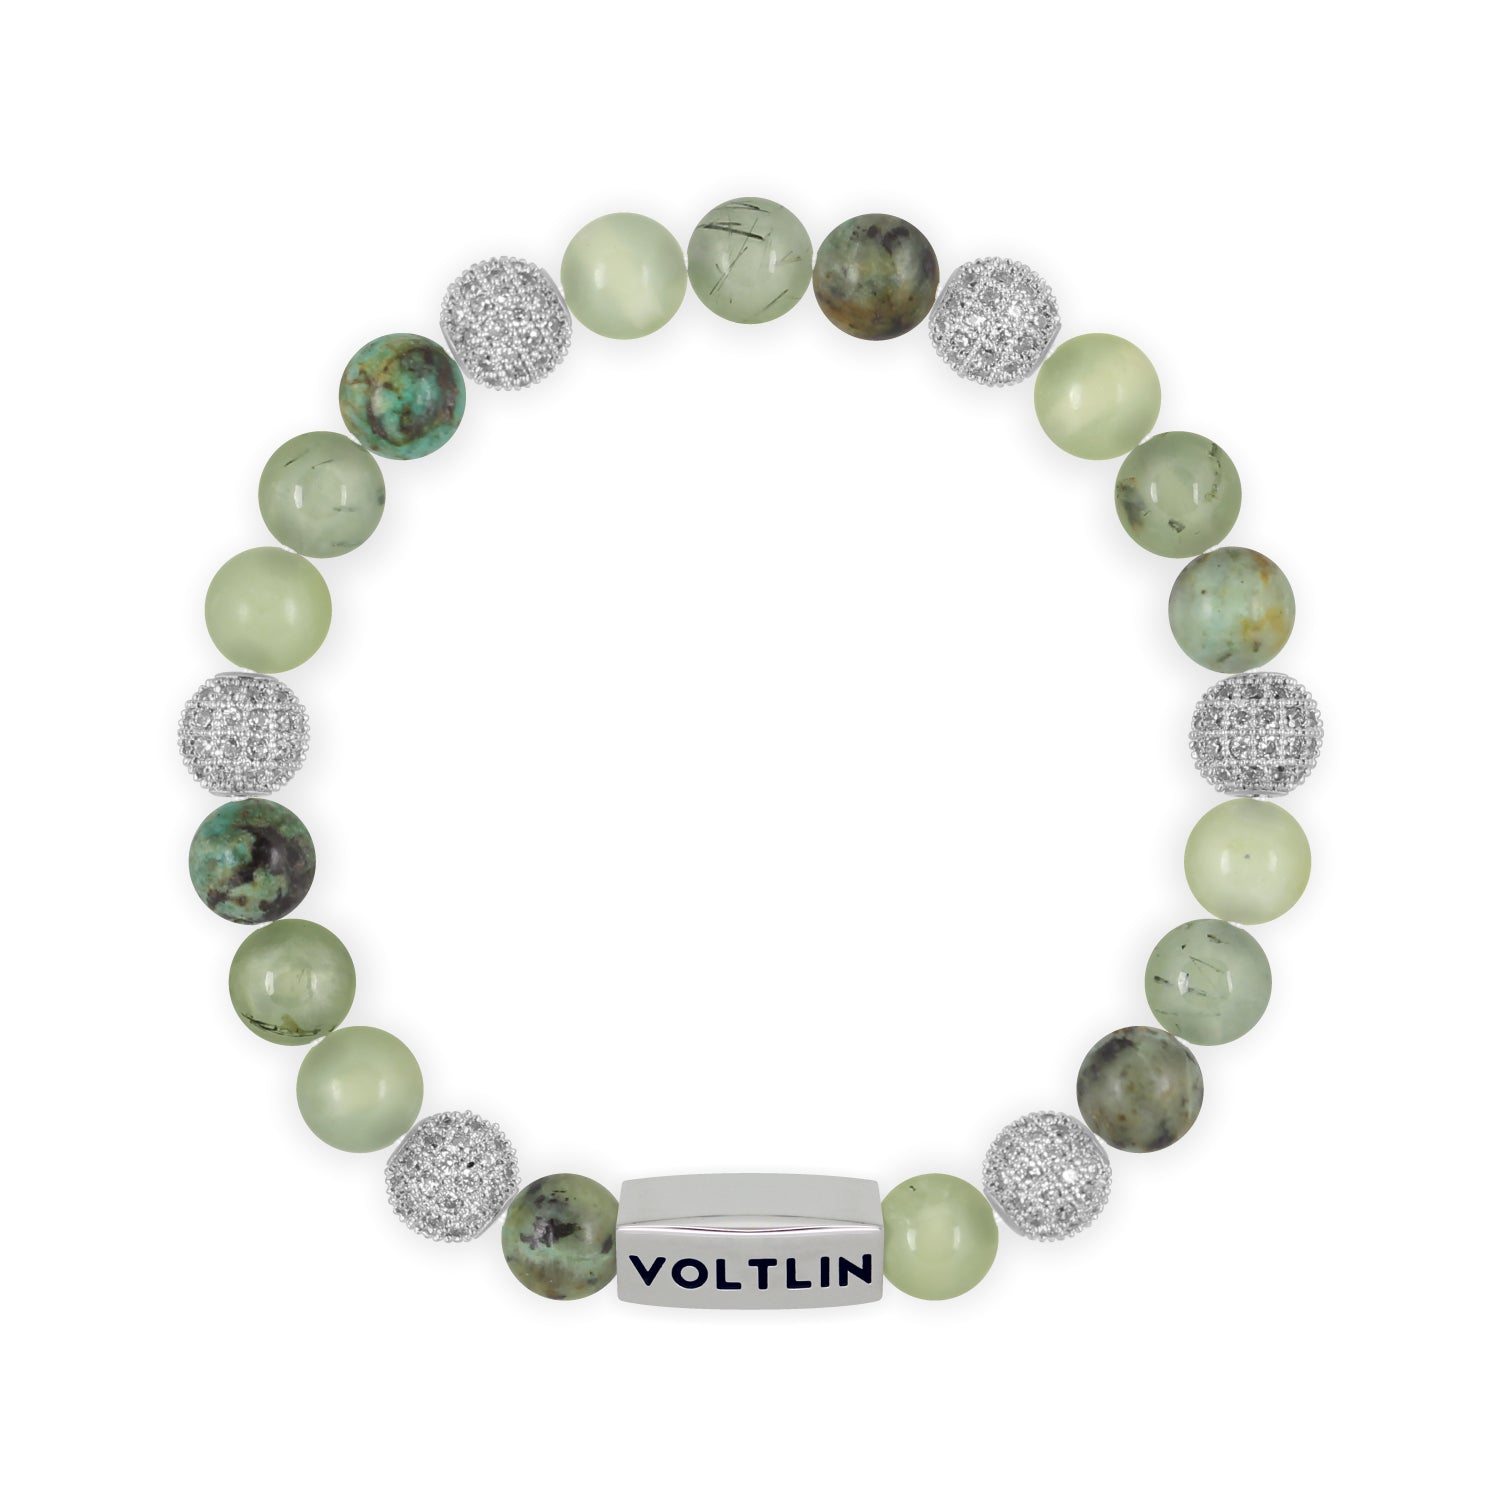 Front view of an 8mm Celadon Sirius beaded stretch bracelet featuring African Turquoise, Silver Pave, Jade, & Prehnite crystal and silver stainless steel logo bead made by Voltlin